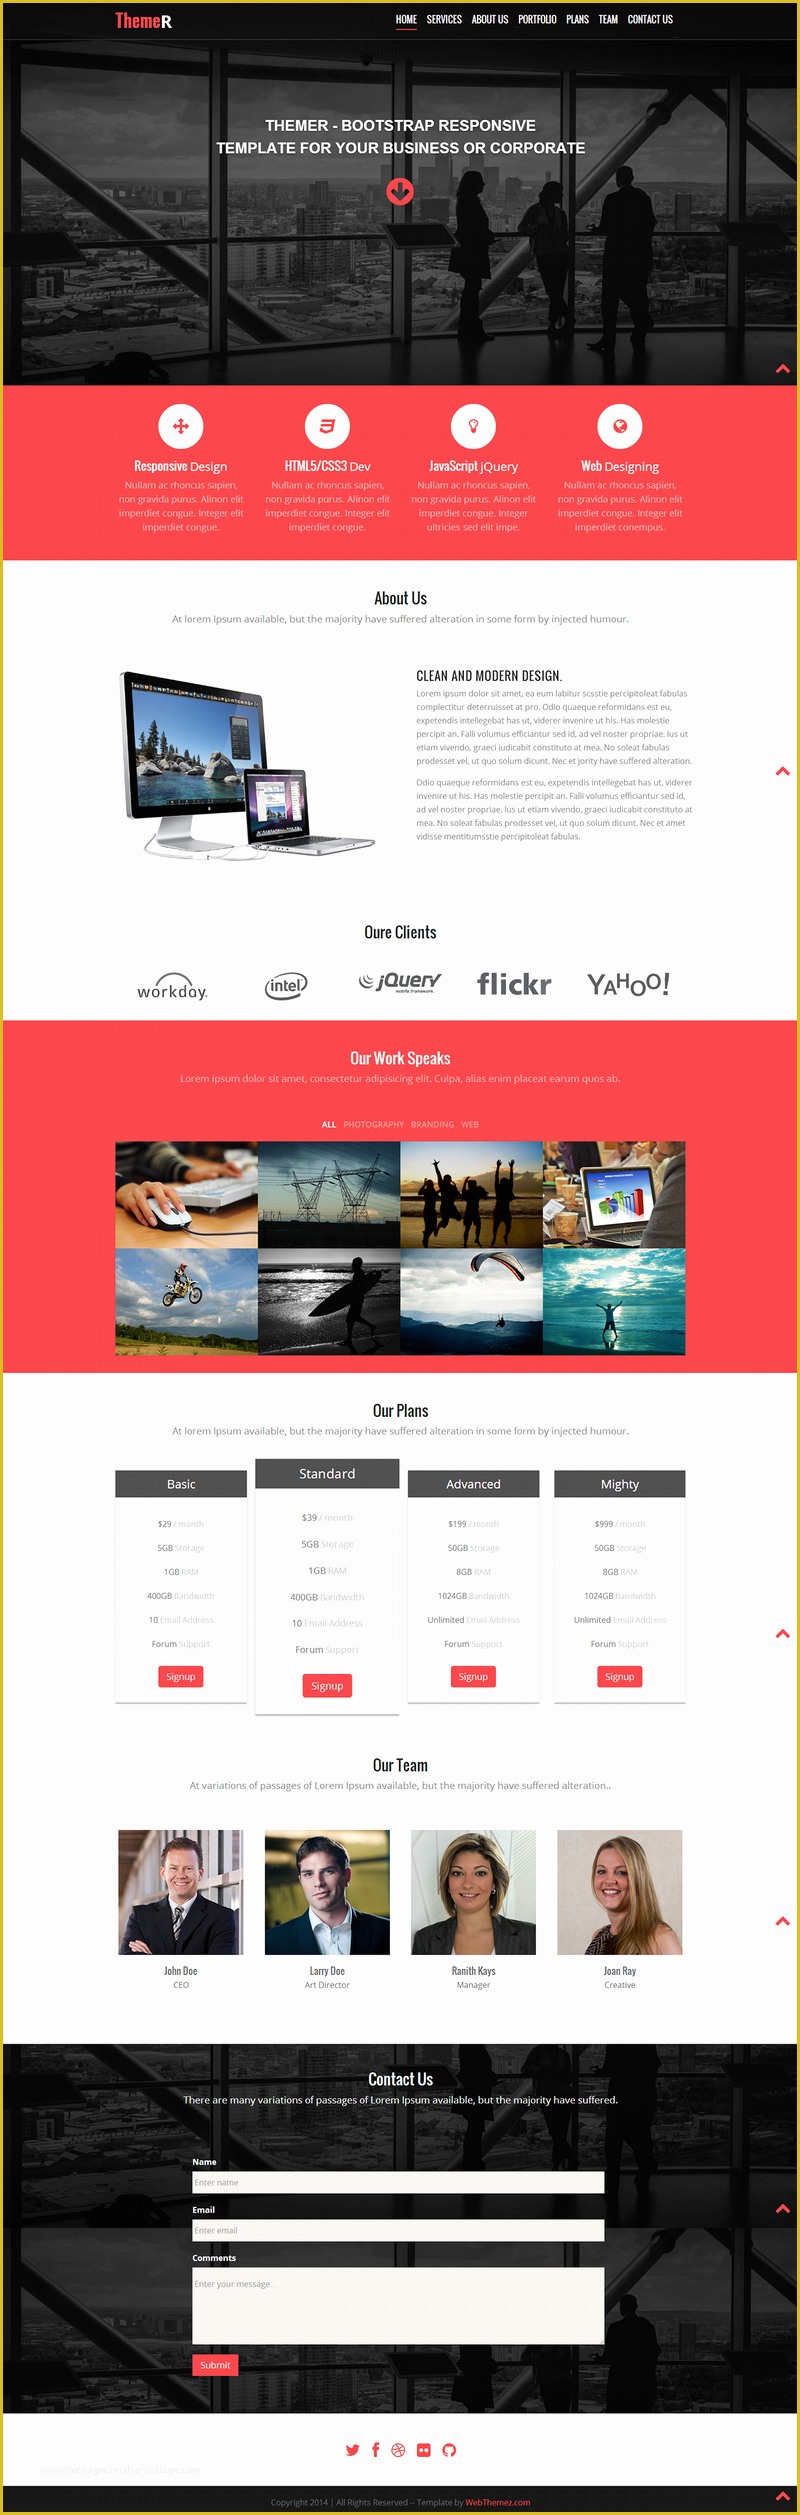 Free Responsive Website Templates Of 10 Best Free Website HTML5 Templates – August 2014